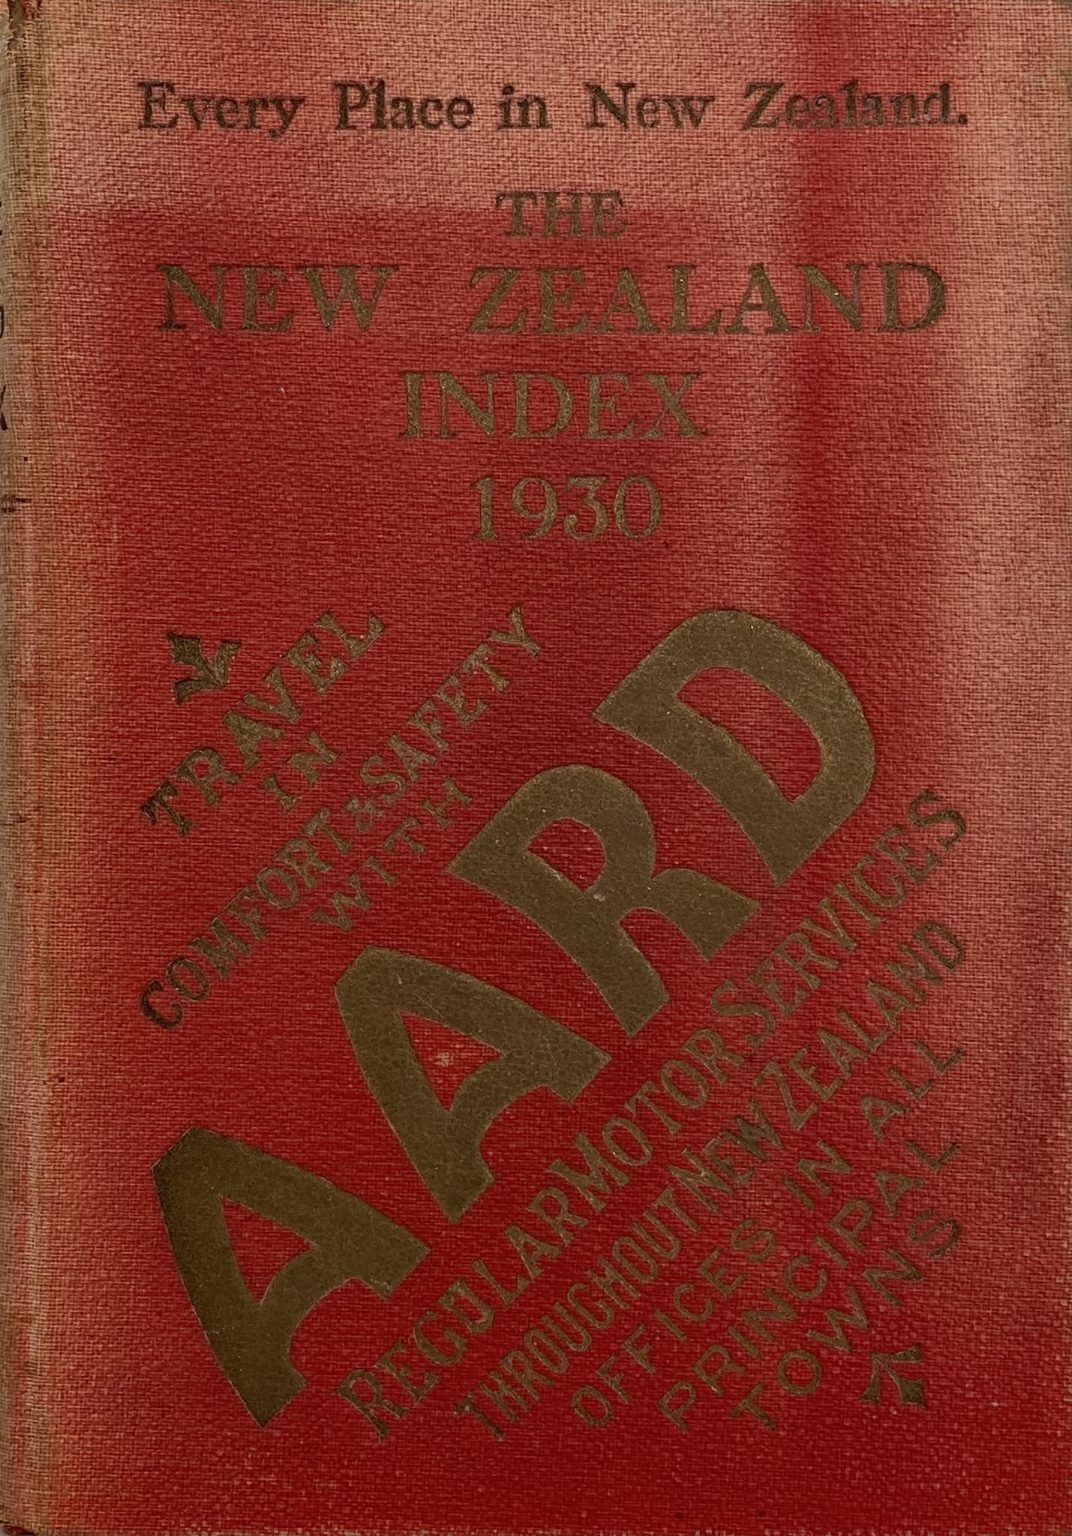 THE NEW ZEALAND INDEX 1930 - Everyplace in New Zealand